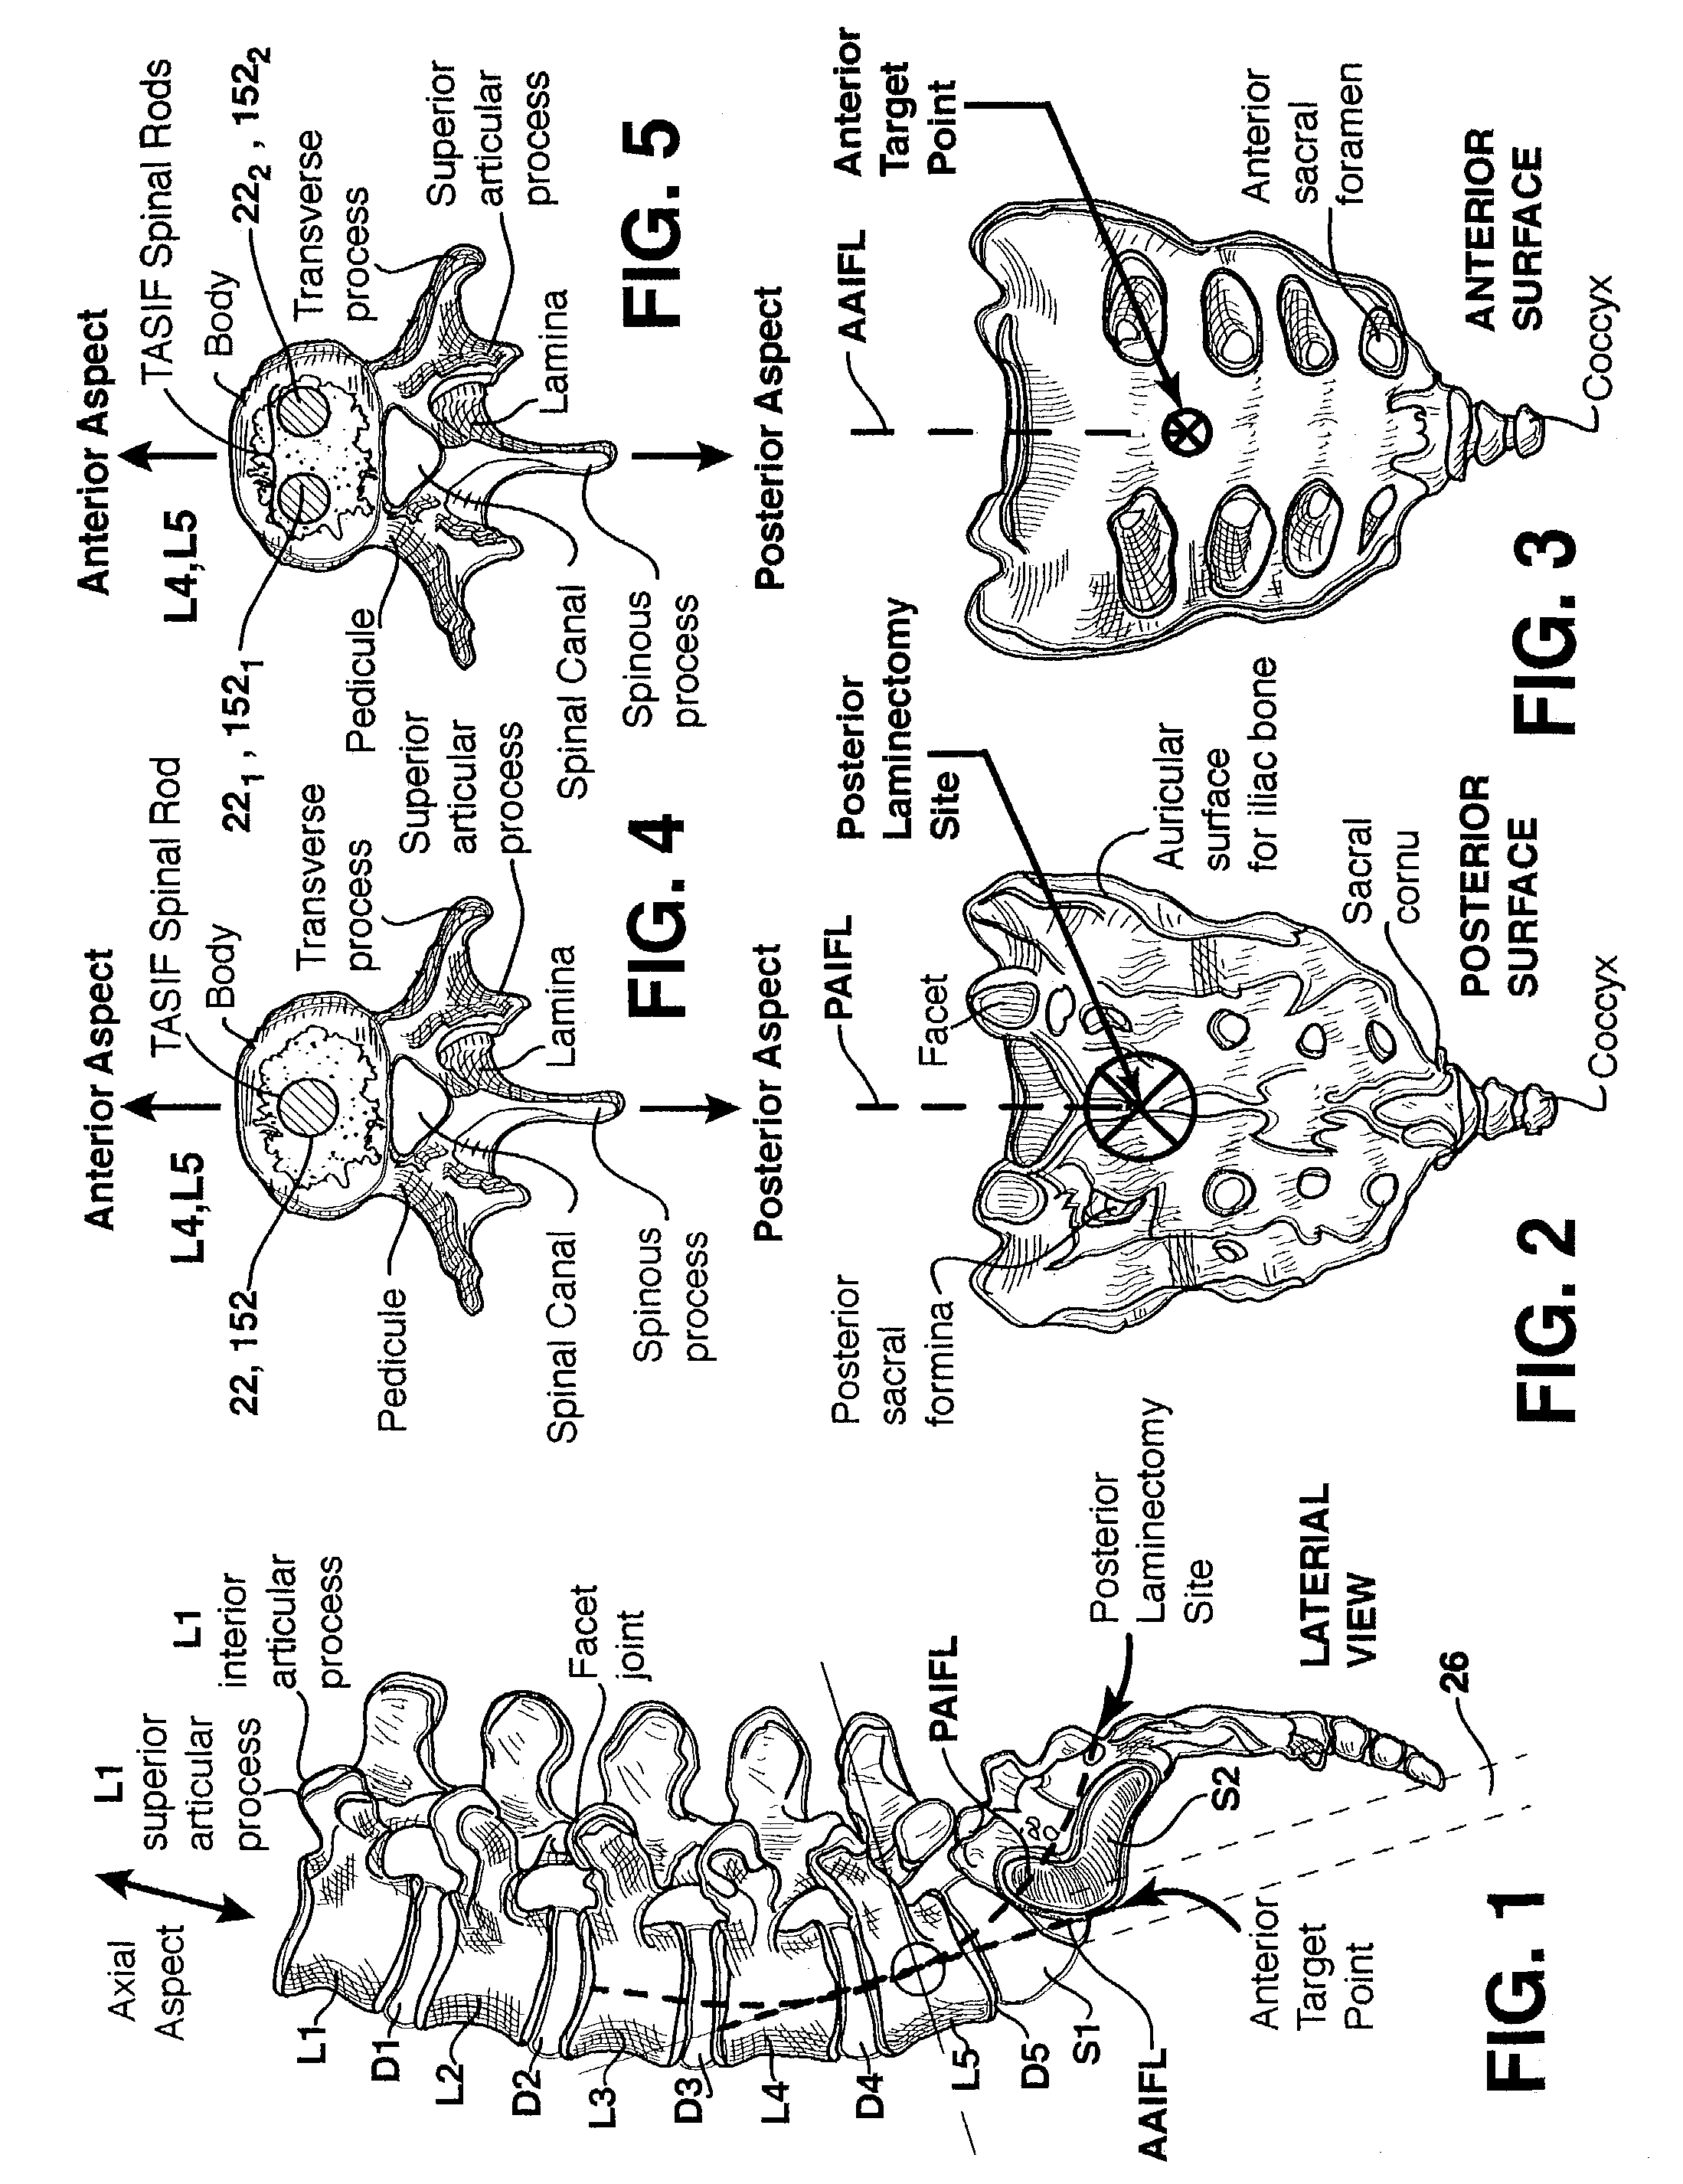 Method and apparatus for providing posterior or anterior trans-sacral access to spinal vertebrae